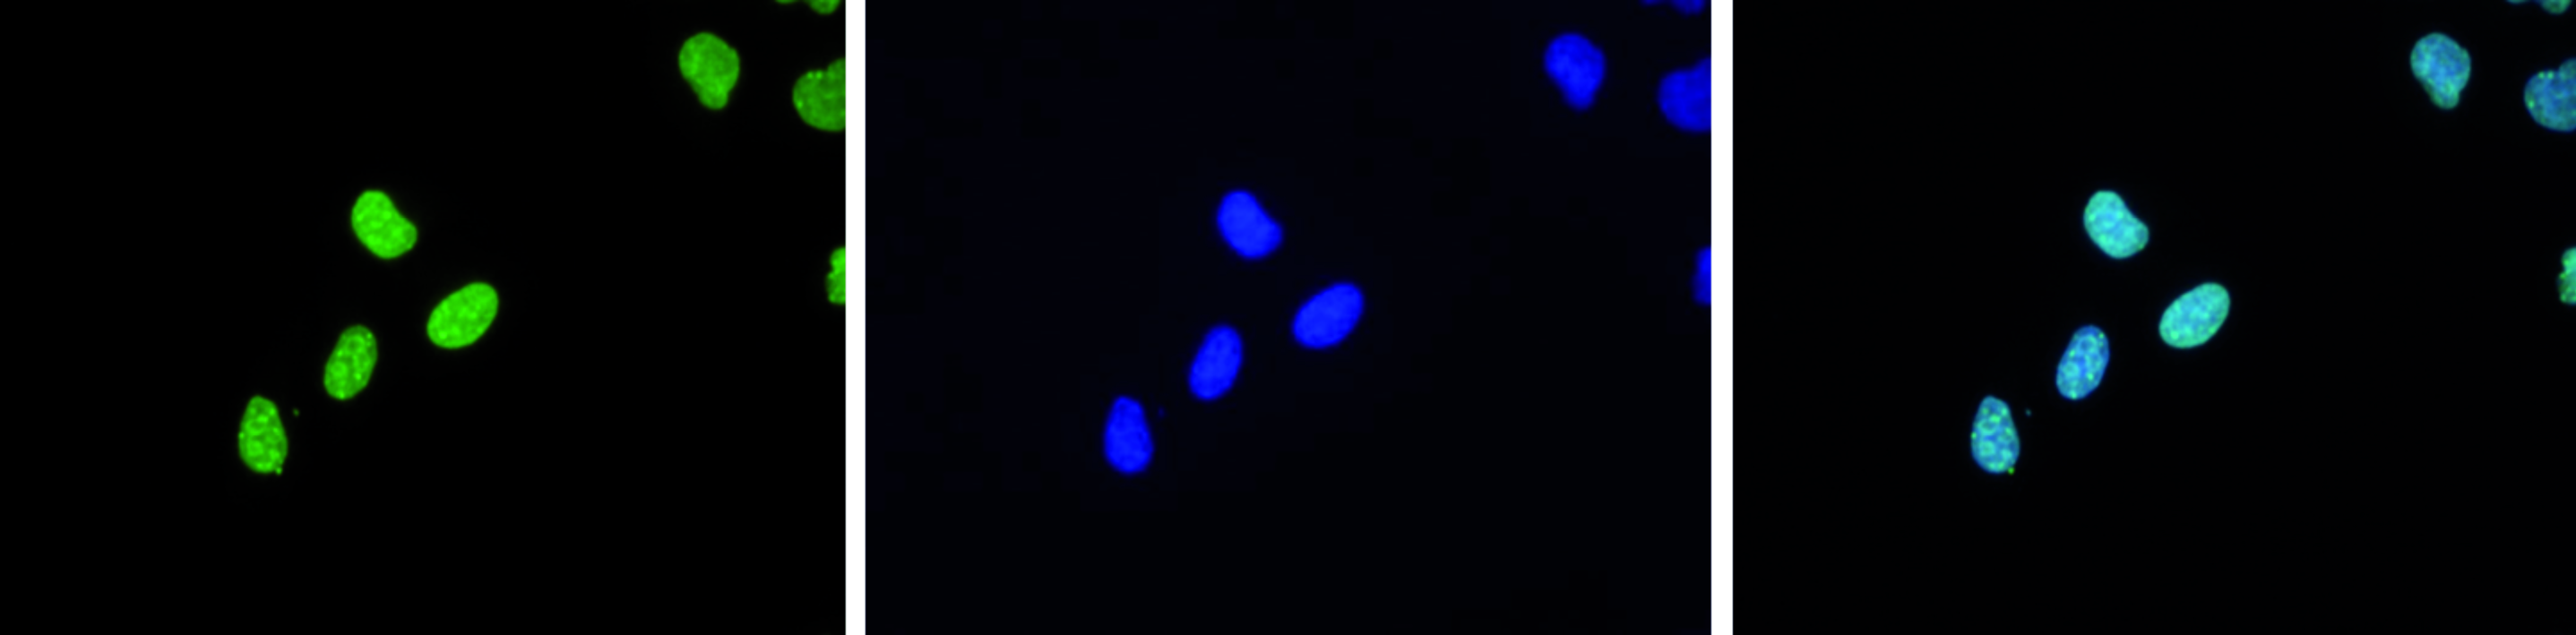 HeLa cells were stained with the Bioss antibody against H3K9me3 (bs-53114R) and with DAPI. Cells were fixed with 4% formaldehyde for 10’ and blocked with PBS/TX-100 containing 5% normal goat serum and 1% BSA. The cells were immunofluorescently labeled with the H3K9me3 antibody (middle) diluted 1:1,000 in blocking solution followed by an anti-rabbit antibody conjugated to Alexa488. The left panel shows staining of the nuclei with DAPI. A merge of both stainings is shown on the right.